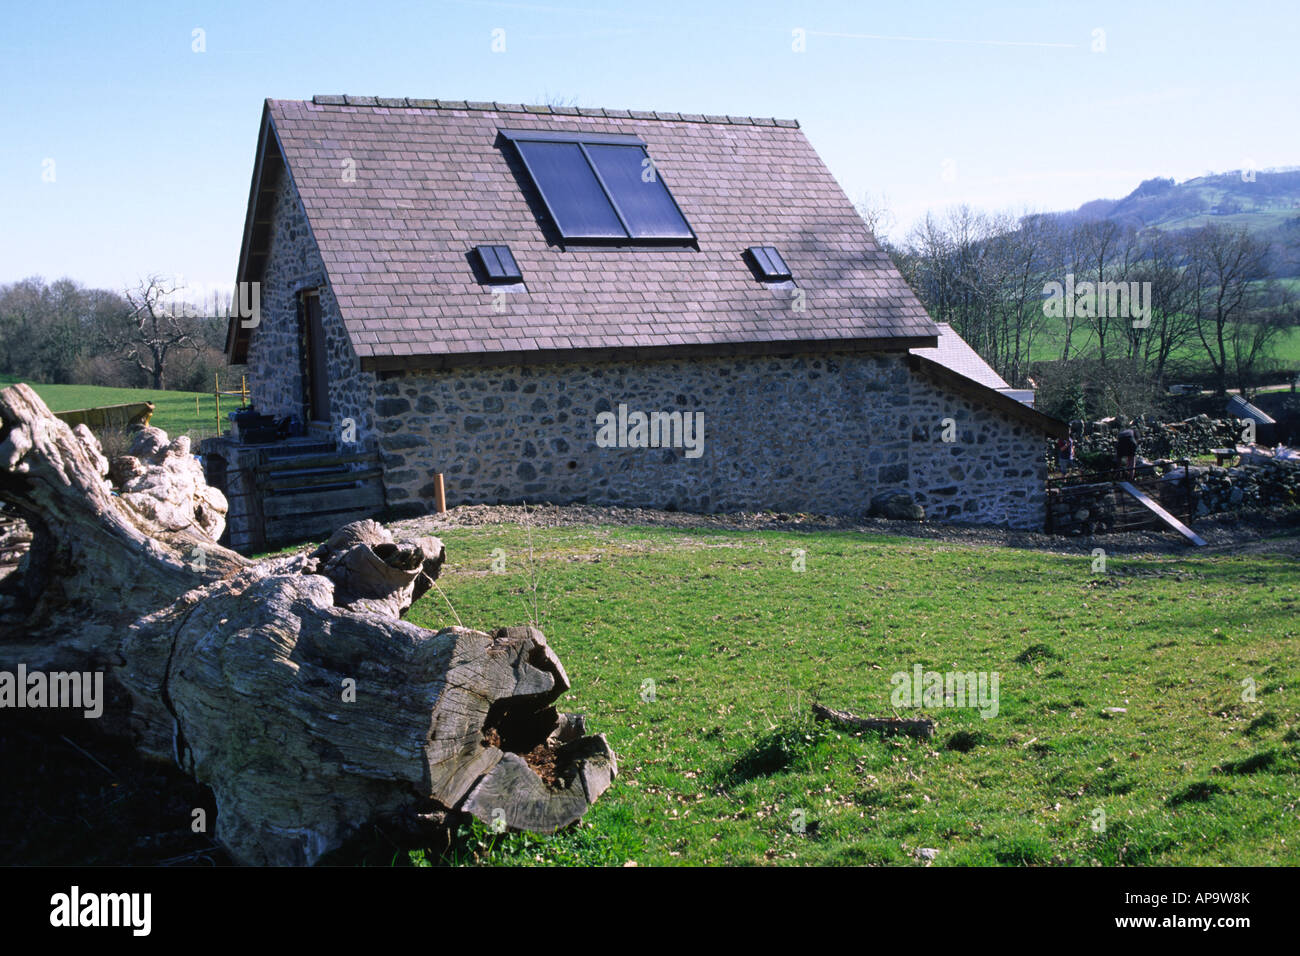 Solar water heating panels on a new barn conversion. Powys, Wales, UK. Stock Photo